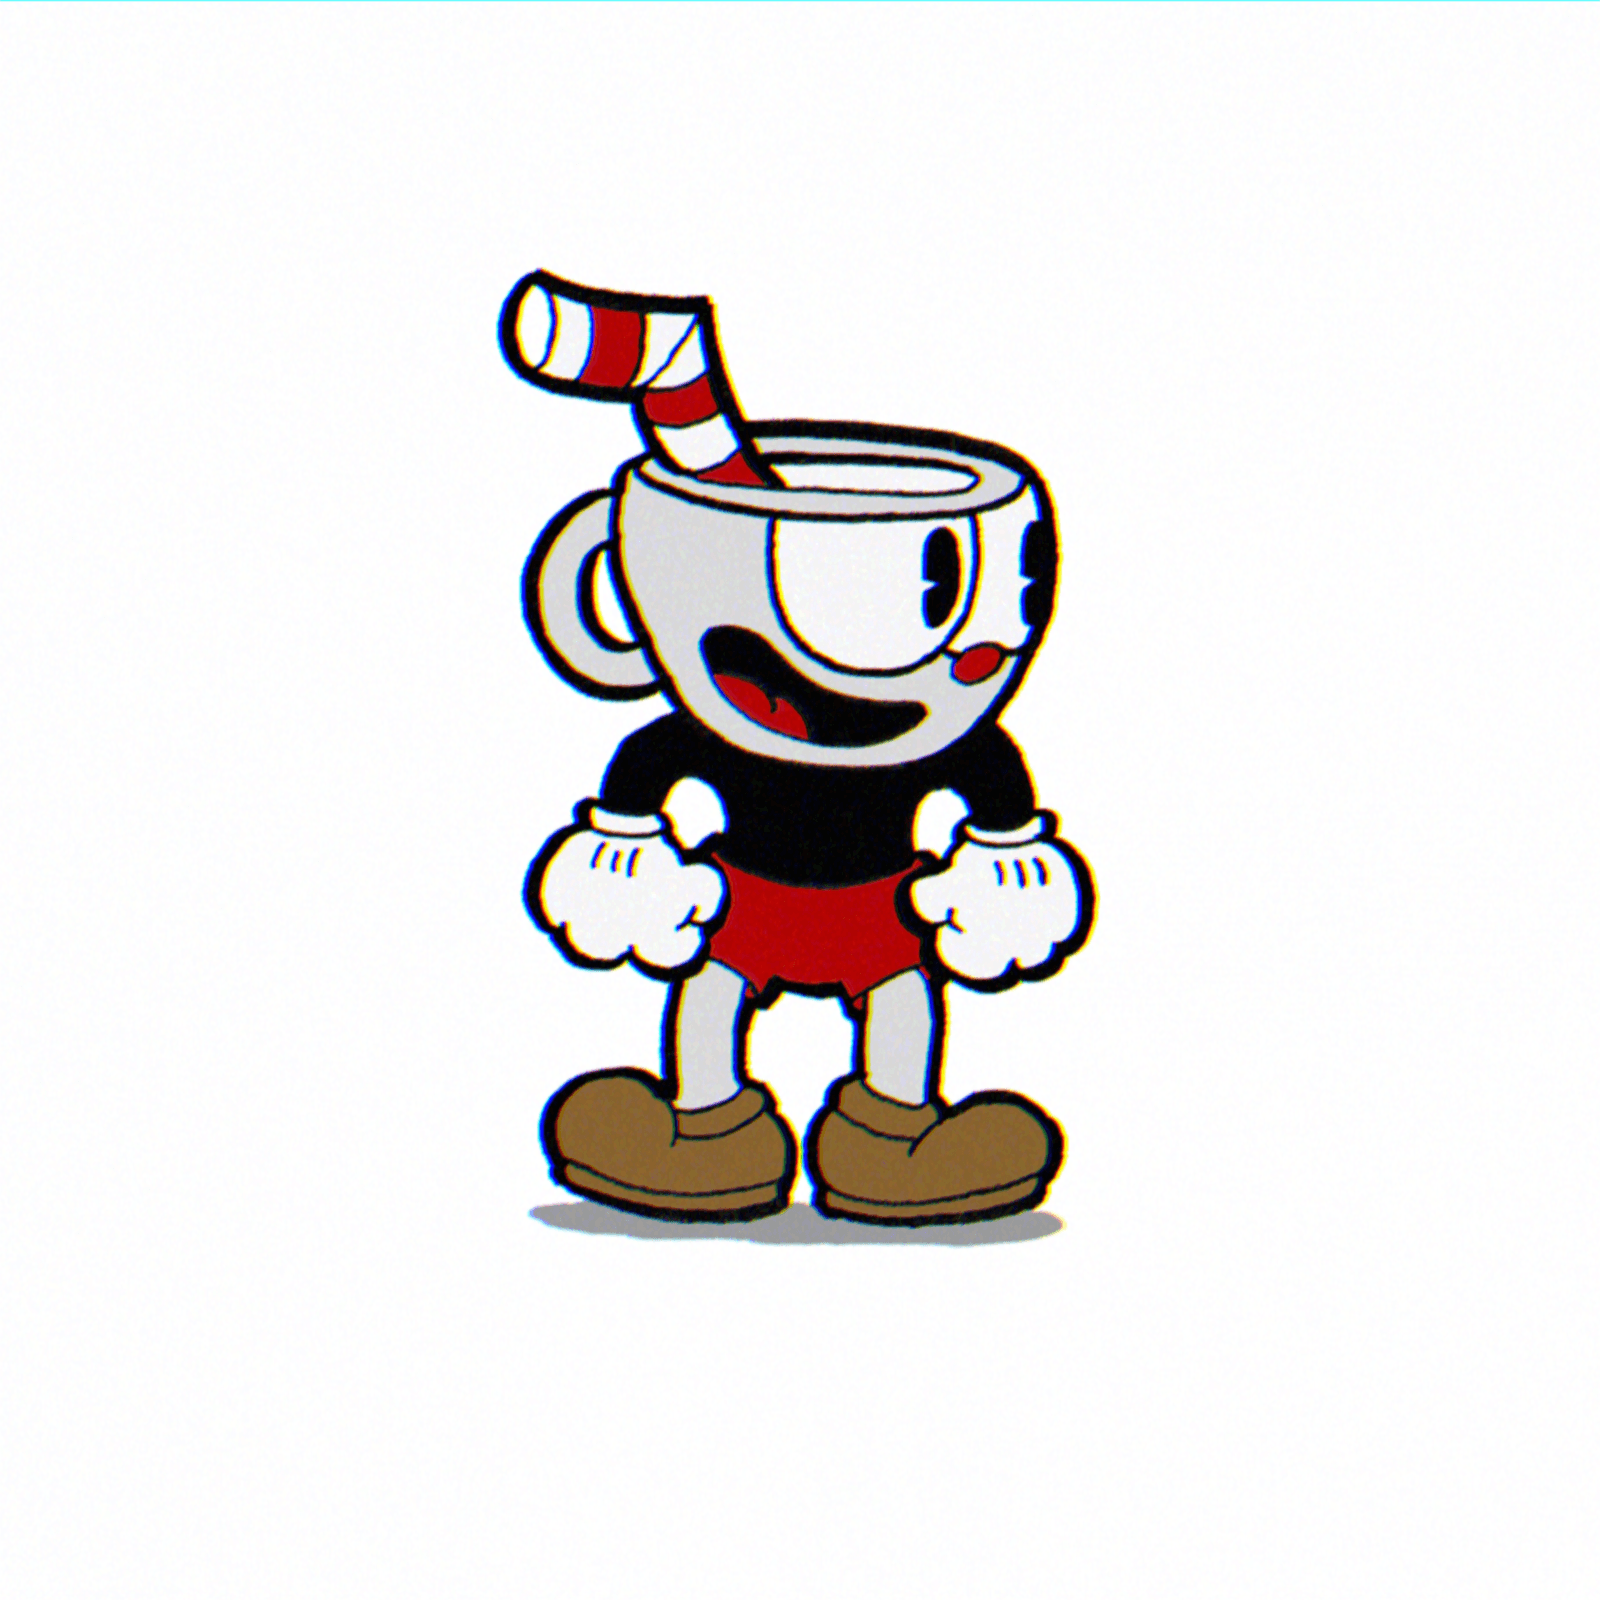 Cuphead screenshots, image and picture